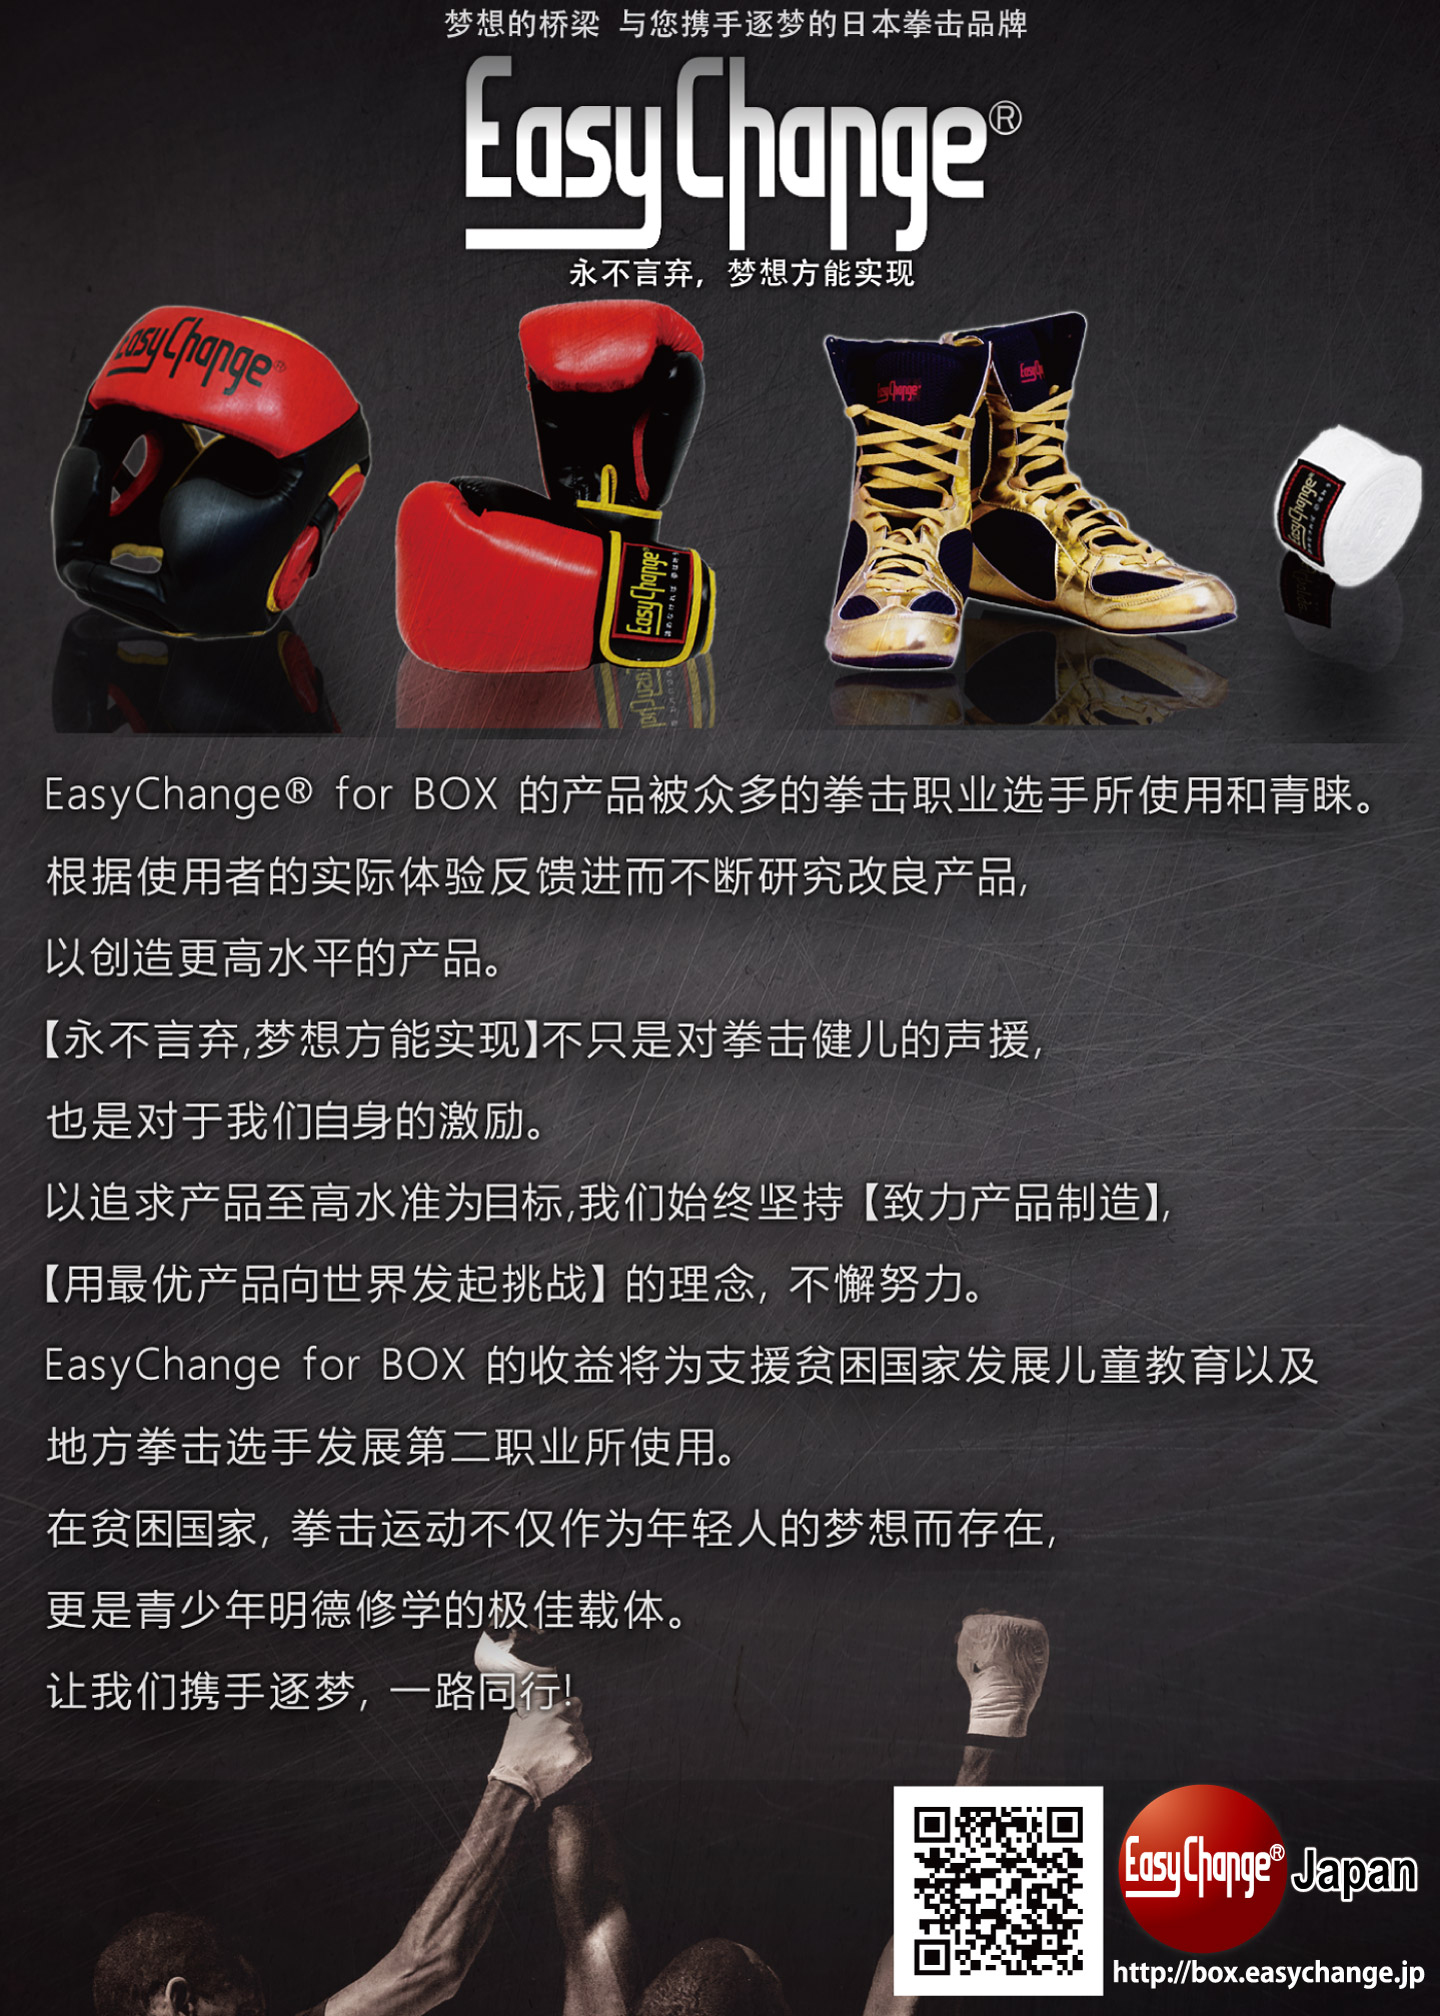 The Japanese boxing brand -EasyChange for BOX- The dream comes true if you do not give it up. We support your dream and ourselves continue challenging it without giving up our dream.